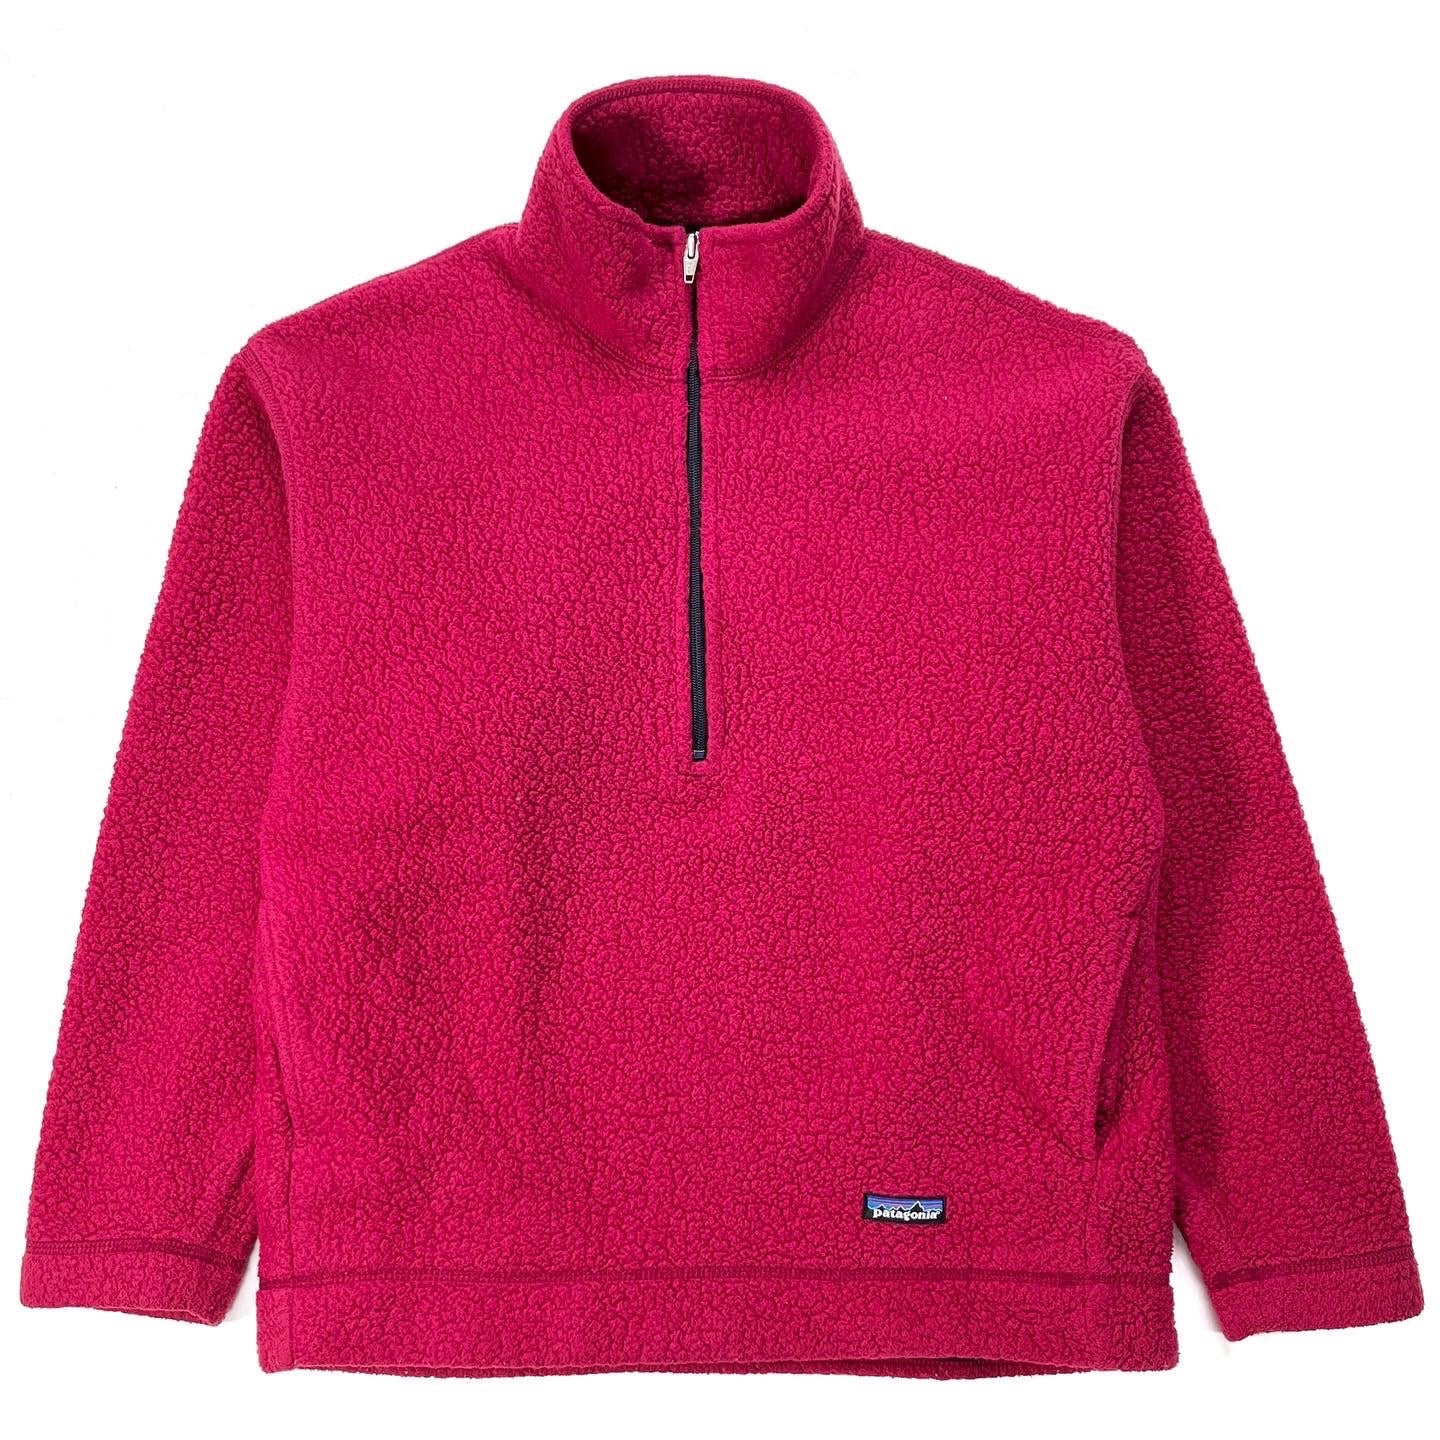 1996 Patagonia Shearling Synchilla Sweater, Cranberry (S)